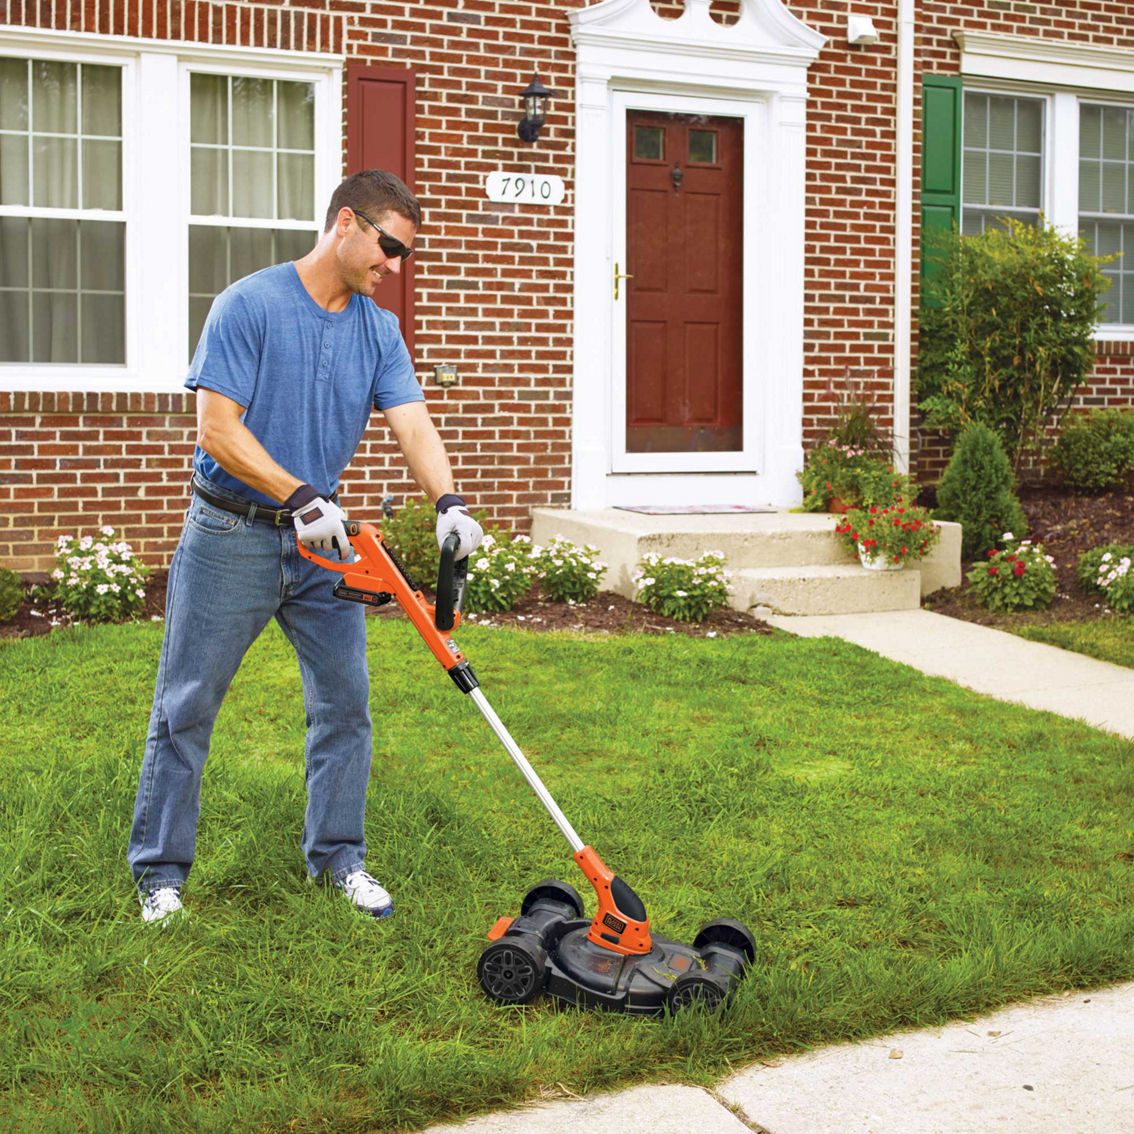 Black + Decker 20V MAX Lithium 12 in. 3-in-1 Compact Mower - Image 6 of 6